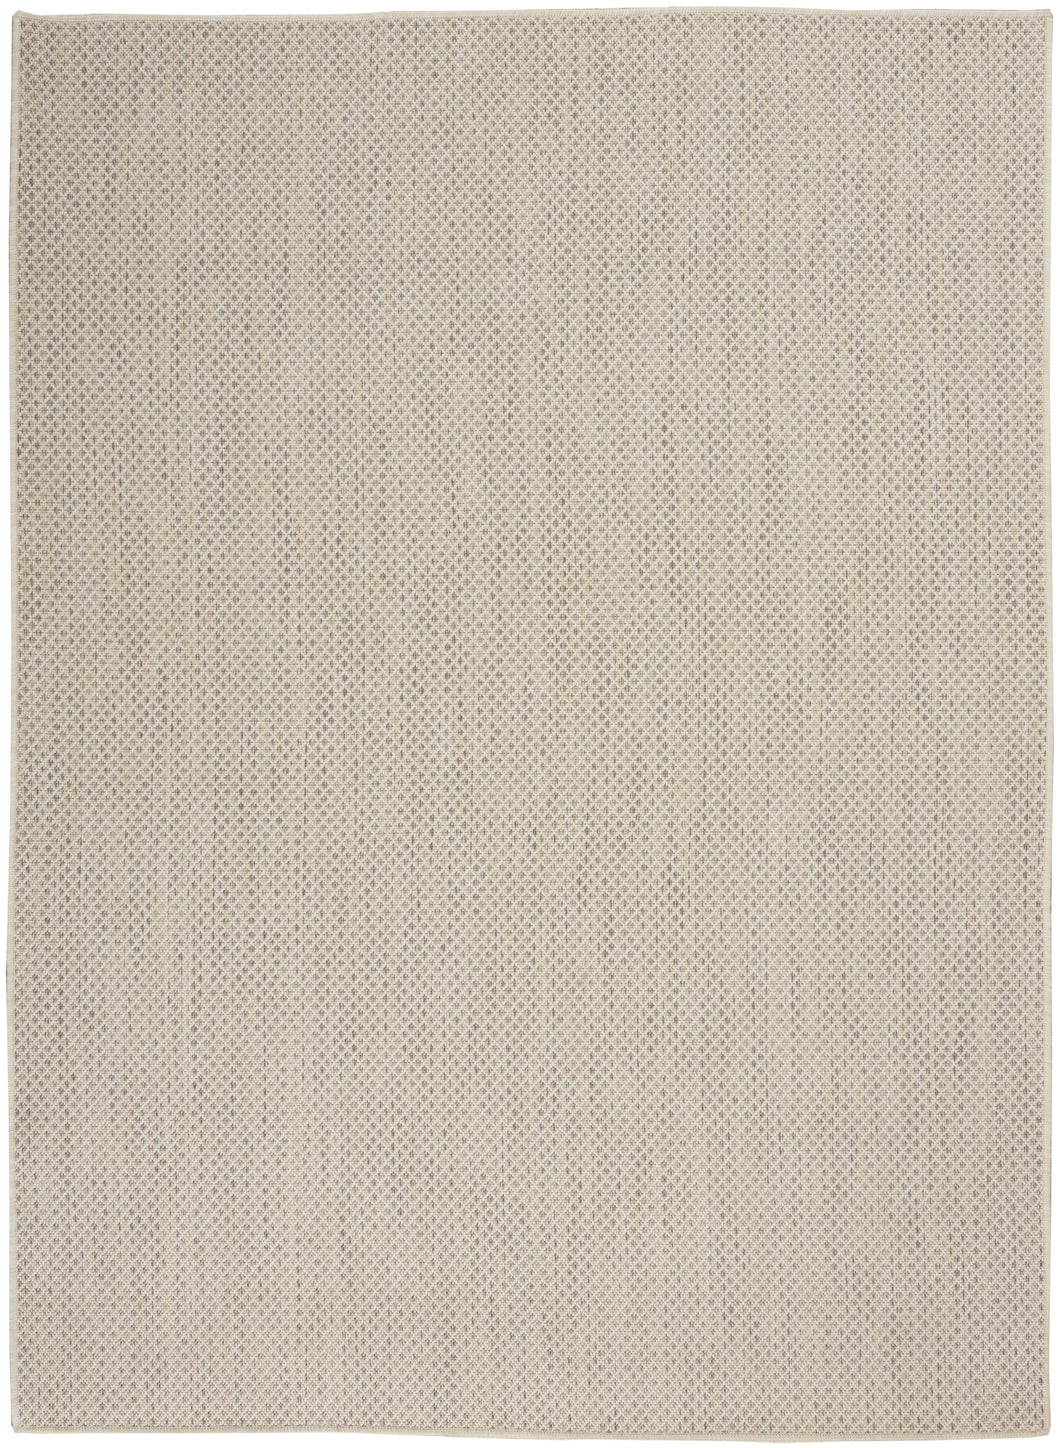 Nourison Courtyard 6'x9' Ivory Silver Area Rug COU01 Ivory Silver